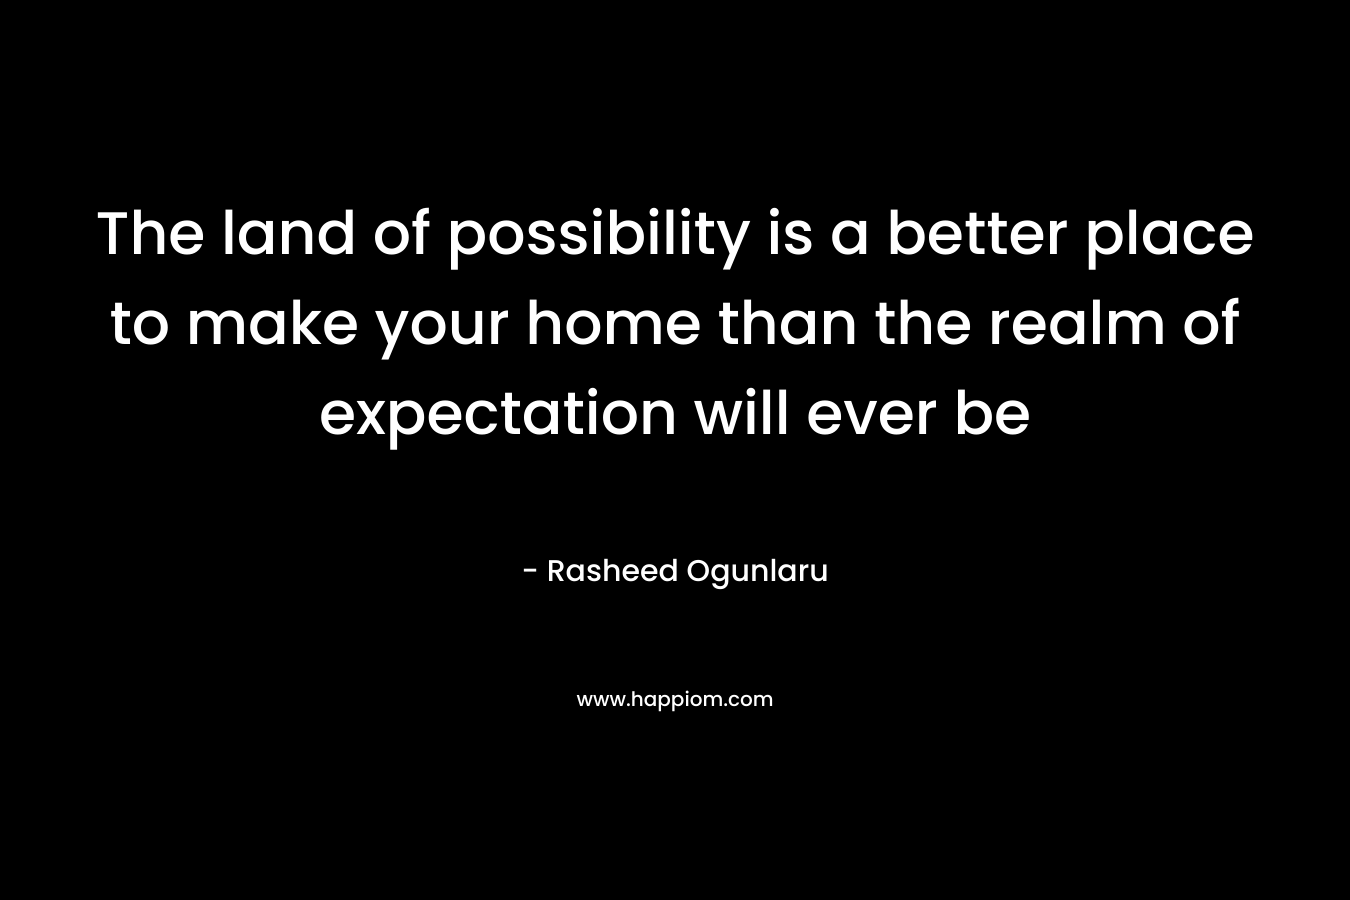 The land of possibility is a better place to make your home than the realm of expectation will ever be